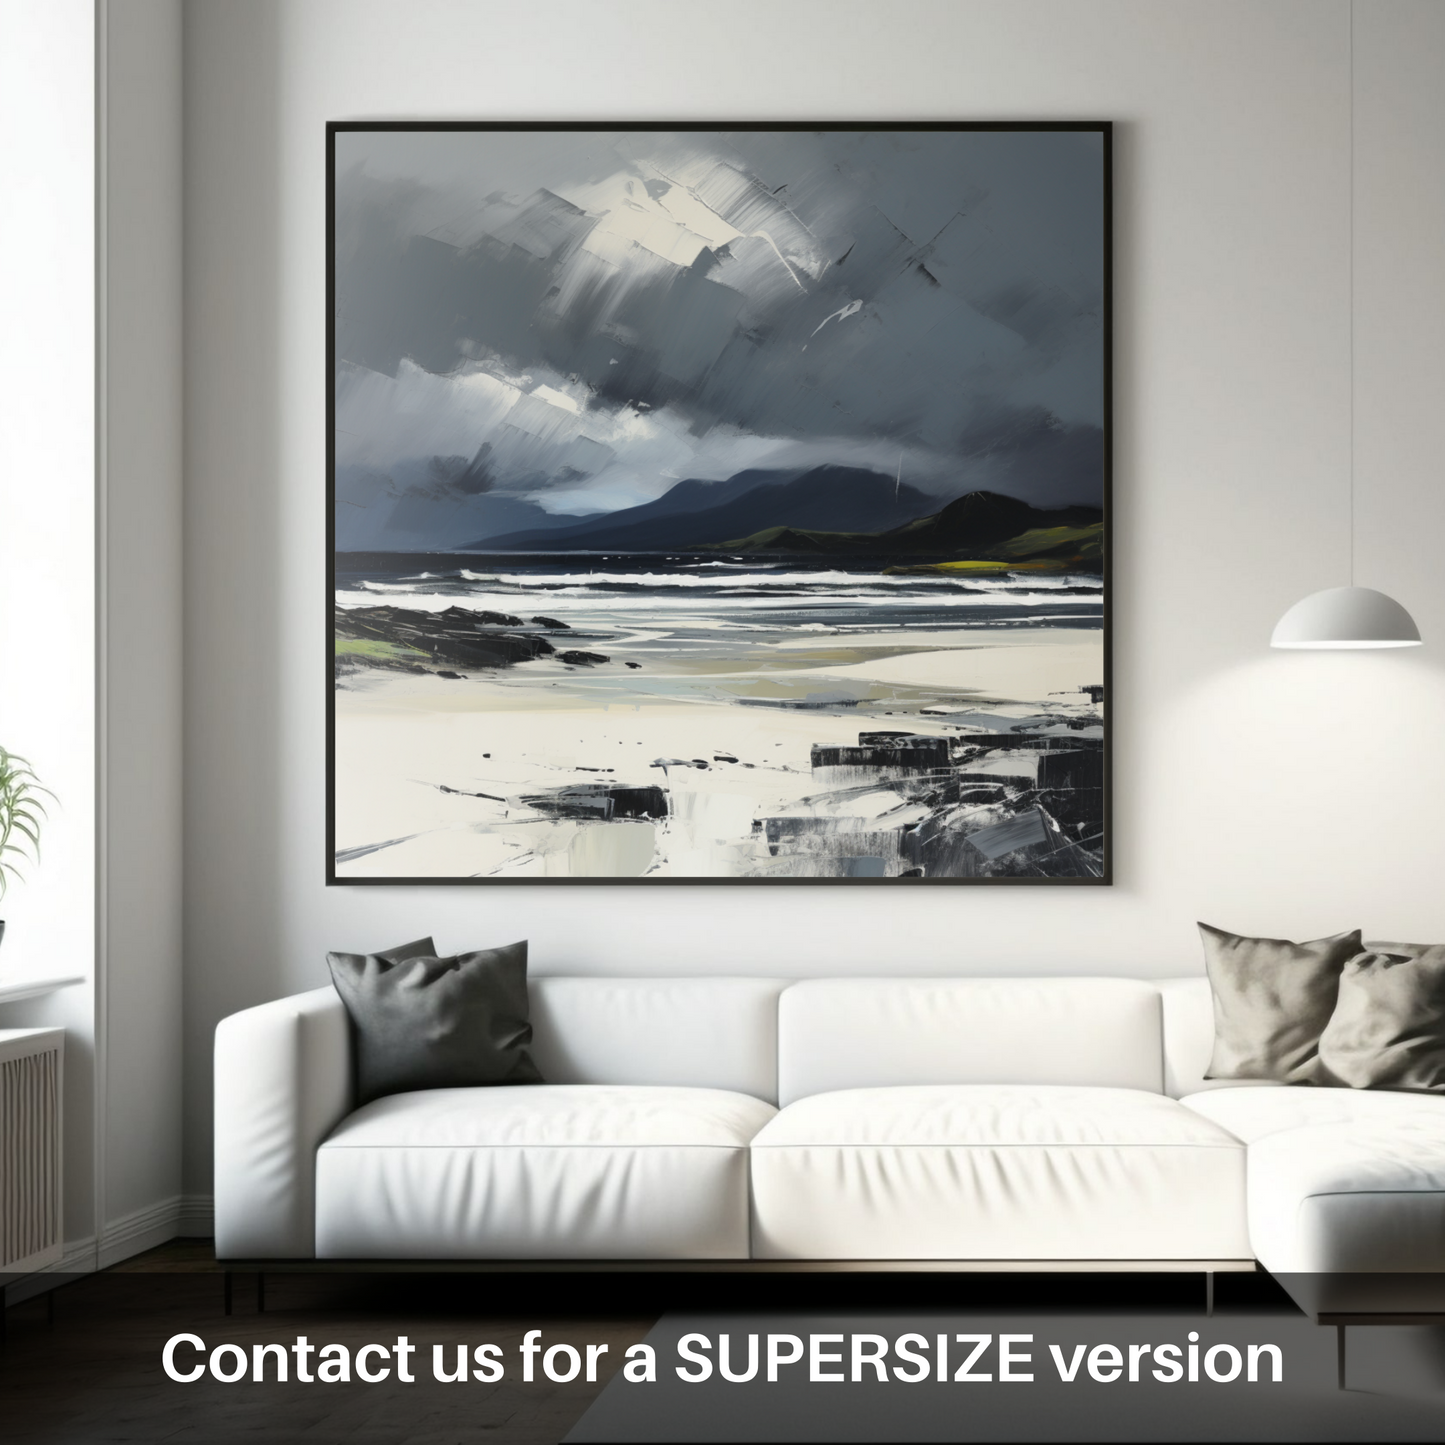 Huge supersize print of Camusdarach Beach with a stormy sky